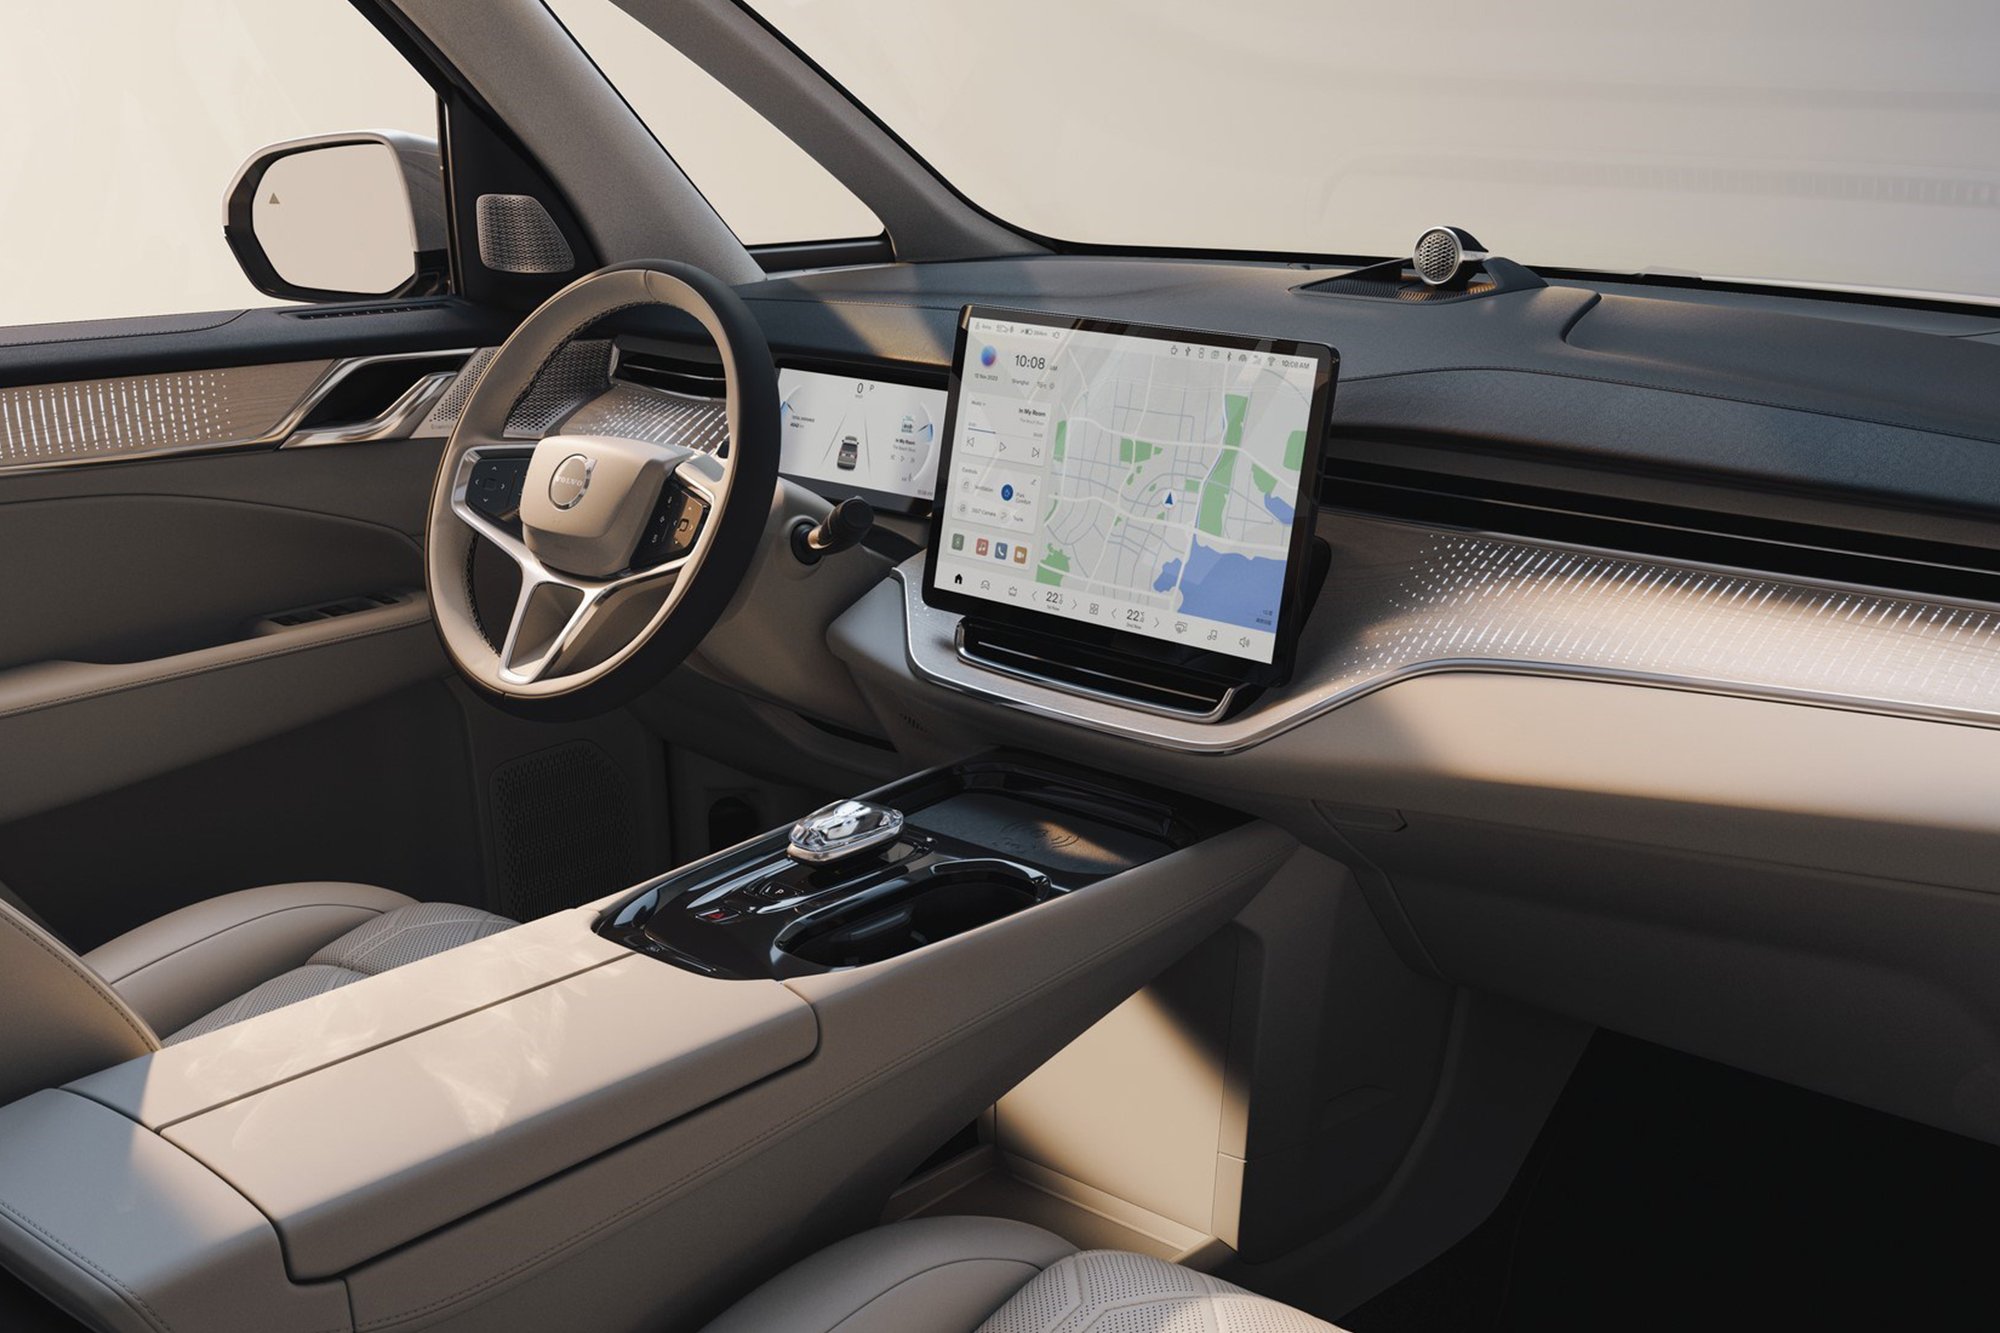 The front seats of the new all-electric Volvo EM90